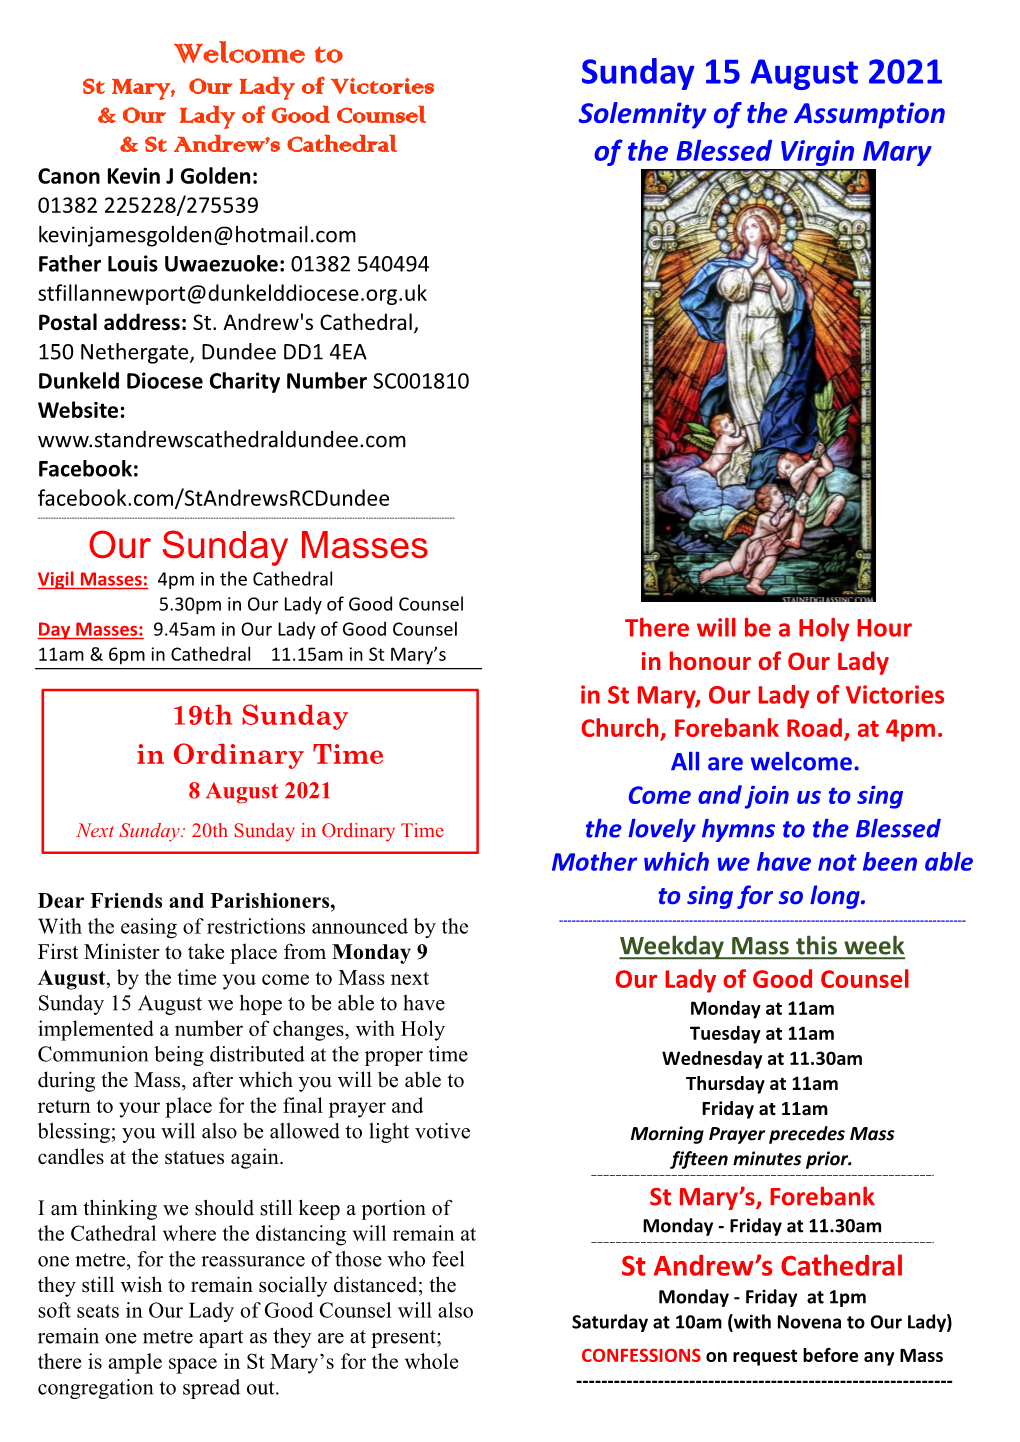 Our Sunday Masses Sunday 15 August 2021